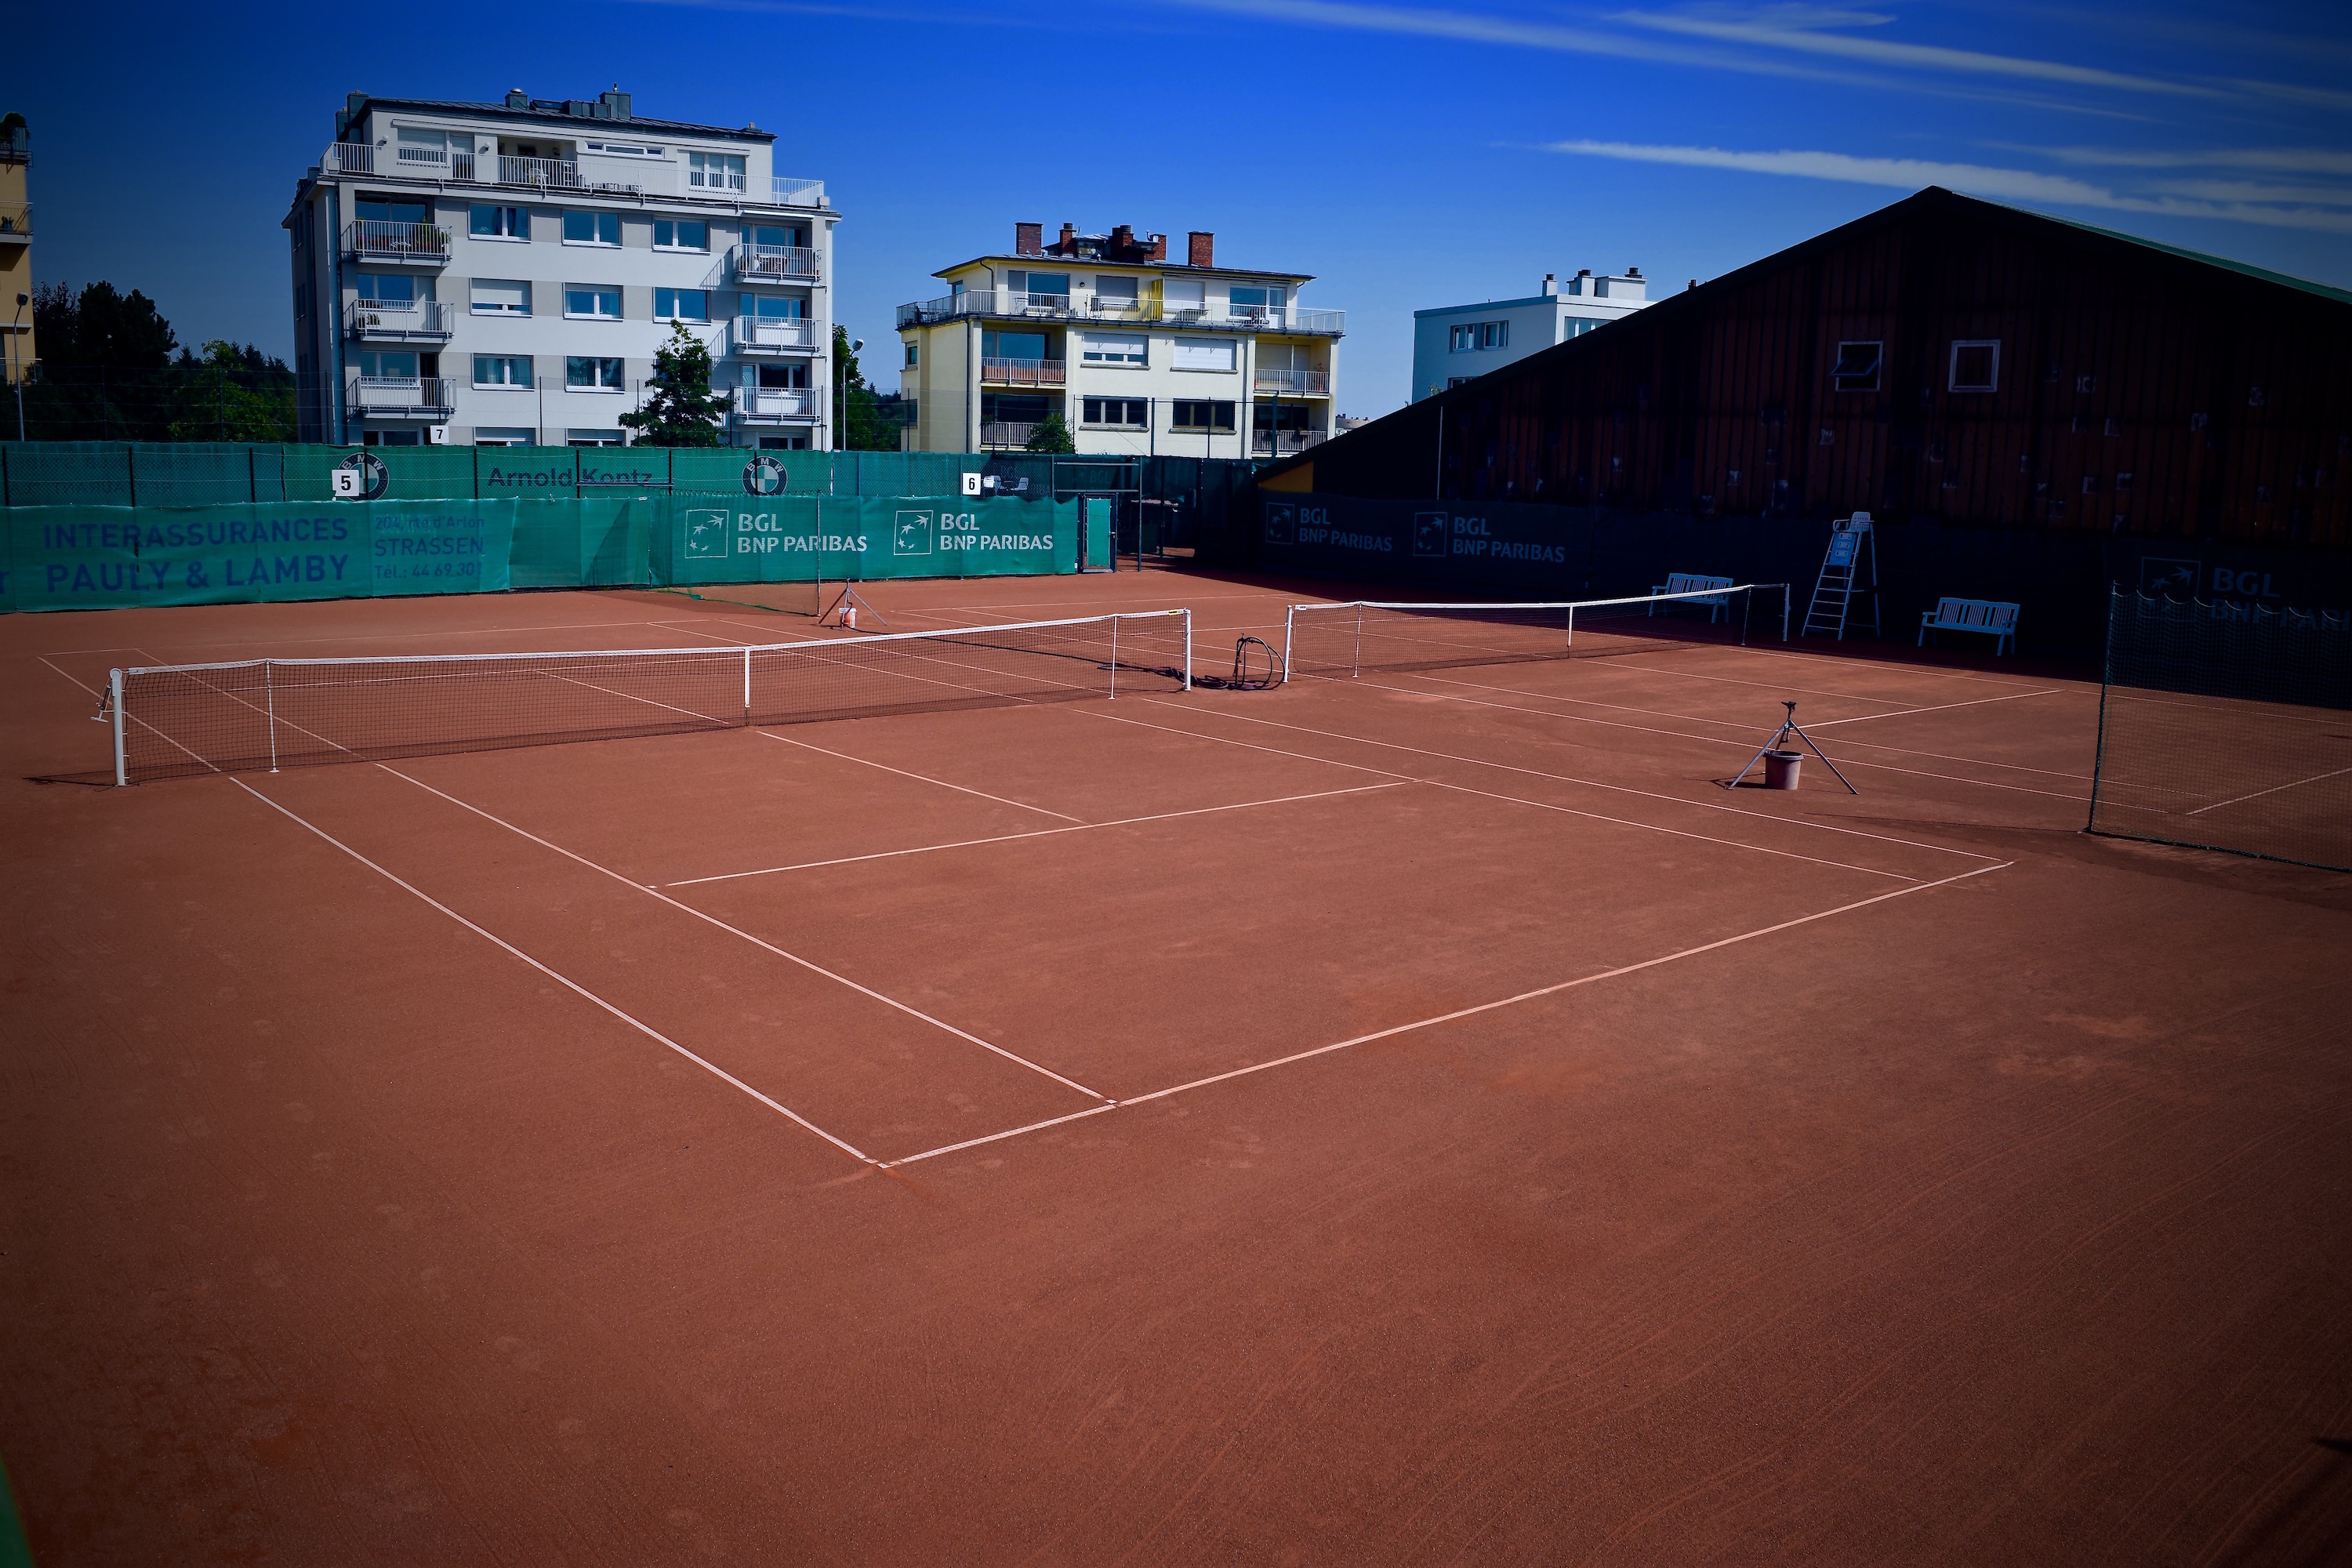 Tennis Club Stade - Luxembourg - Discover our new Decoturf courts